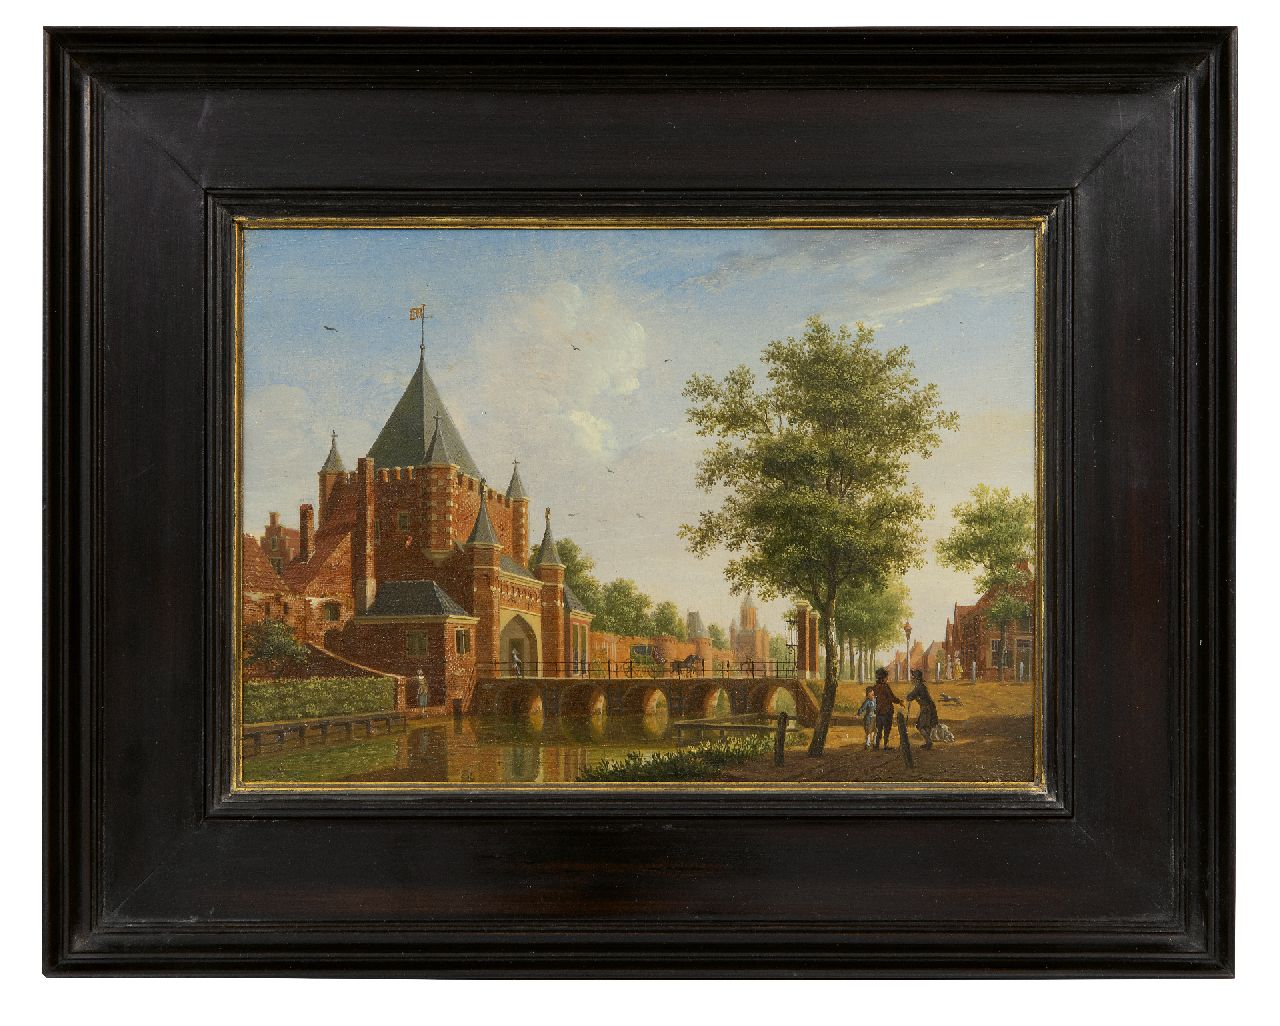 Ouwater I.  | Isaac Ouwater | Paintings offered for sale | View of the city gate Grote Houtpoort in Haarlem, oil on panel 13.8 x 19.6 cm, signed l.r. with monogram and (prijs is per pendant, verkoop alleen tezamen)